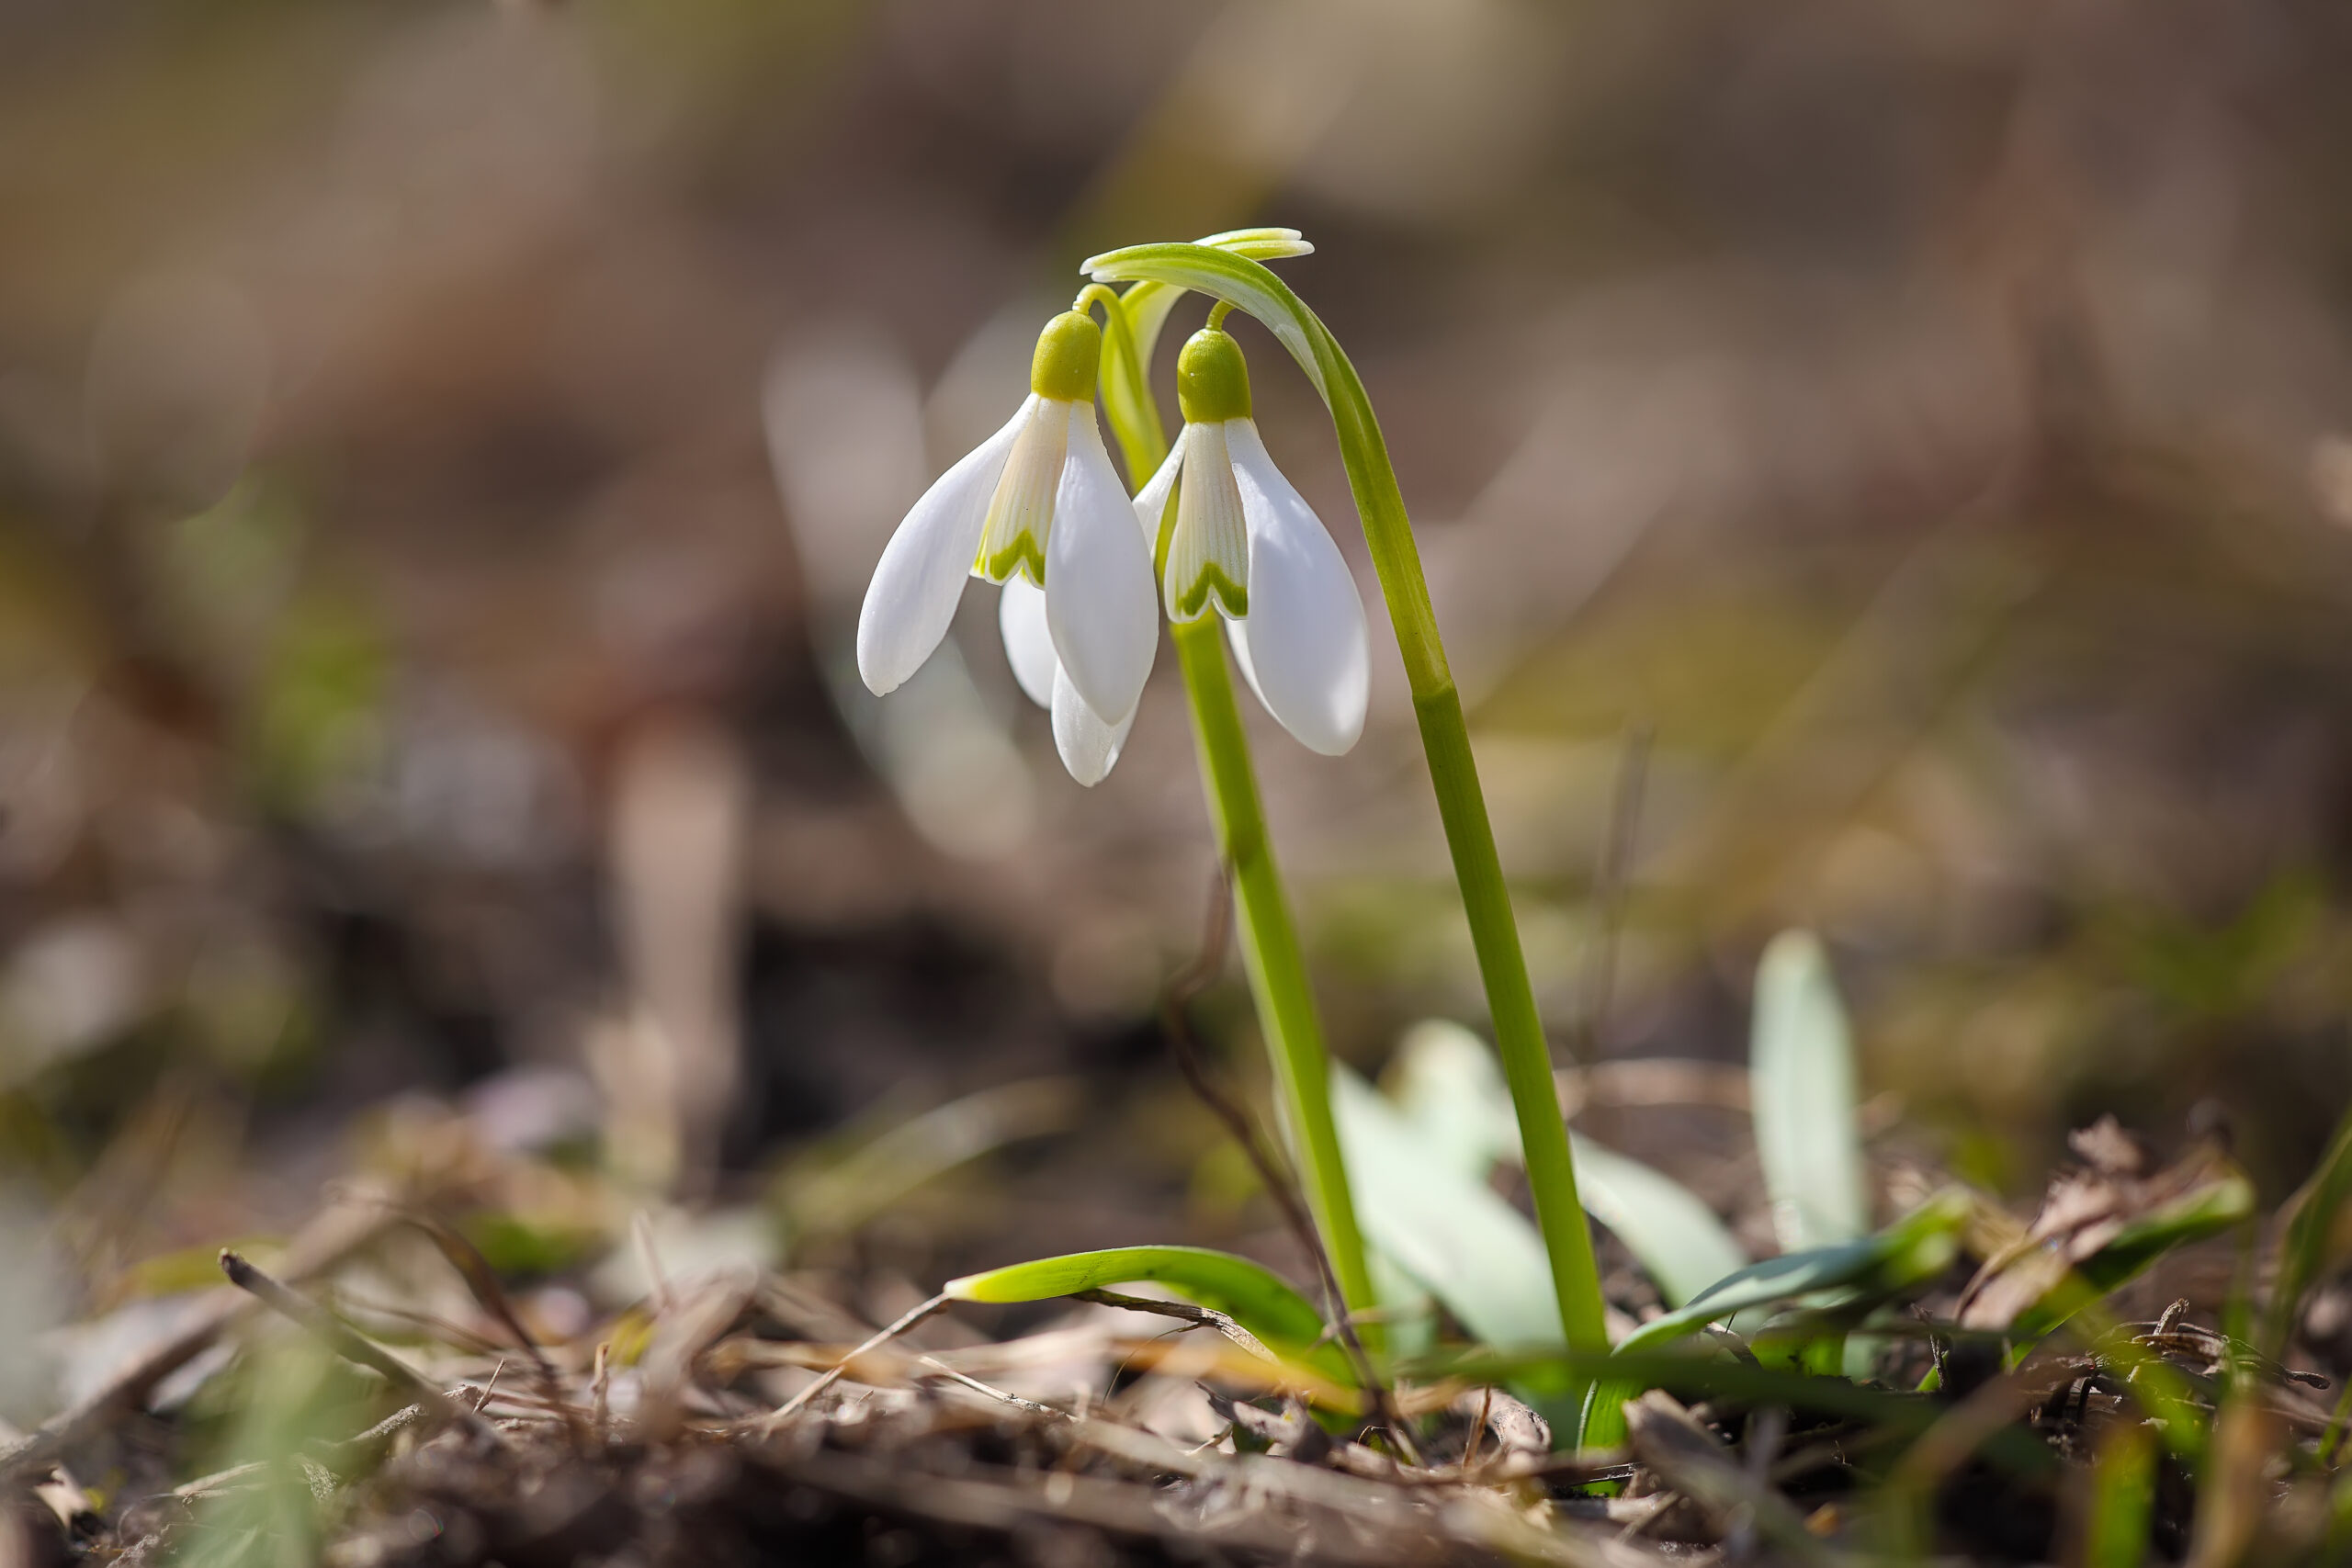 Spring snowdrop flowers blooming in sunny day. Shallow depth of field